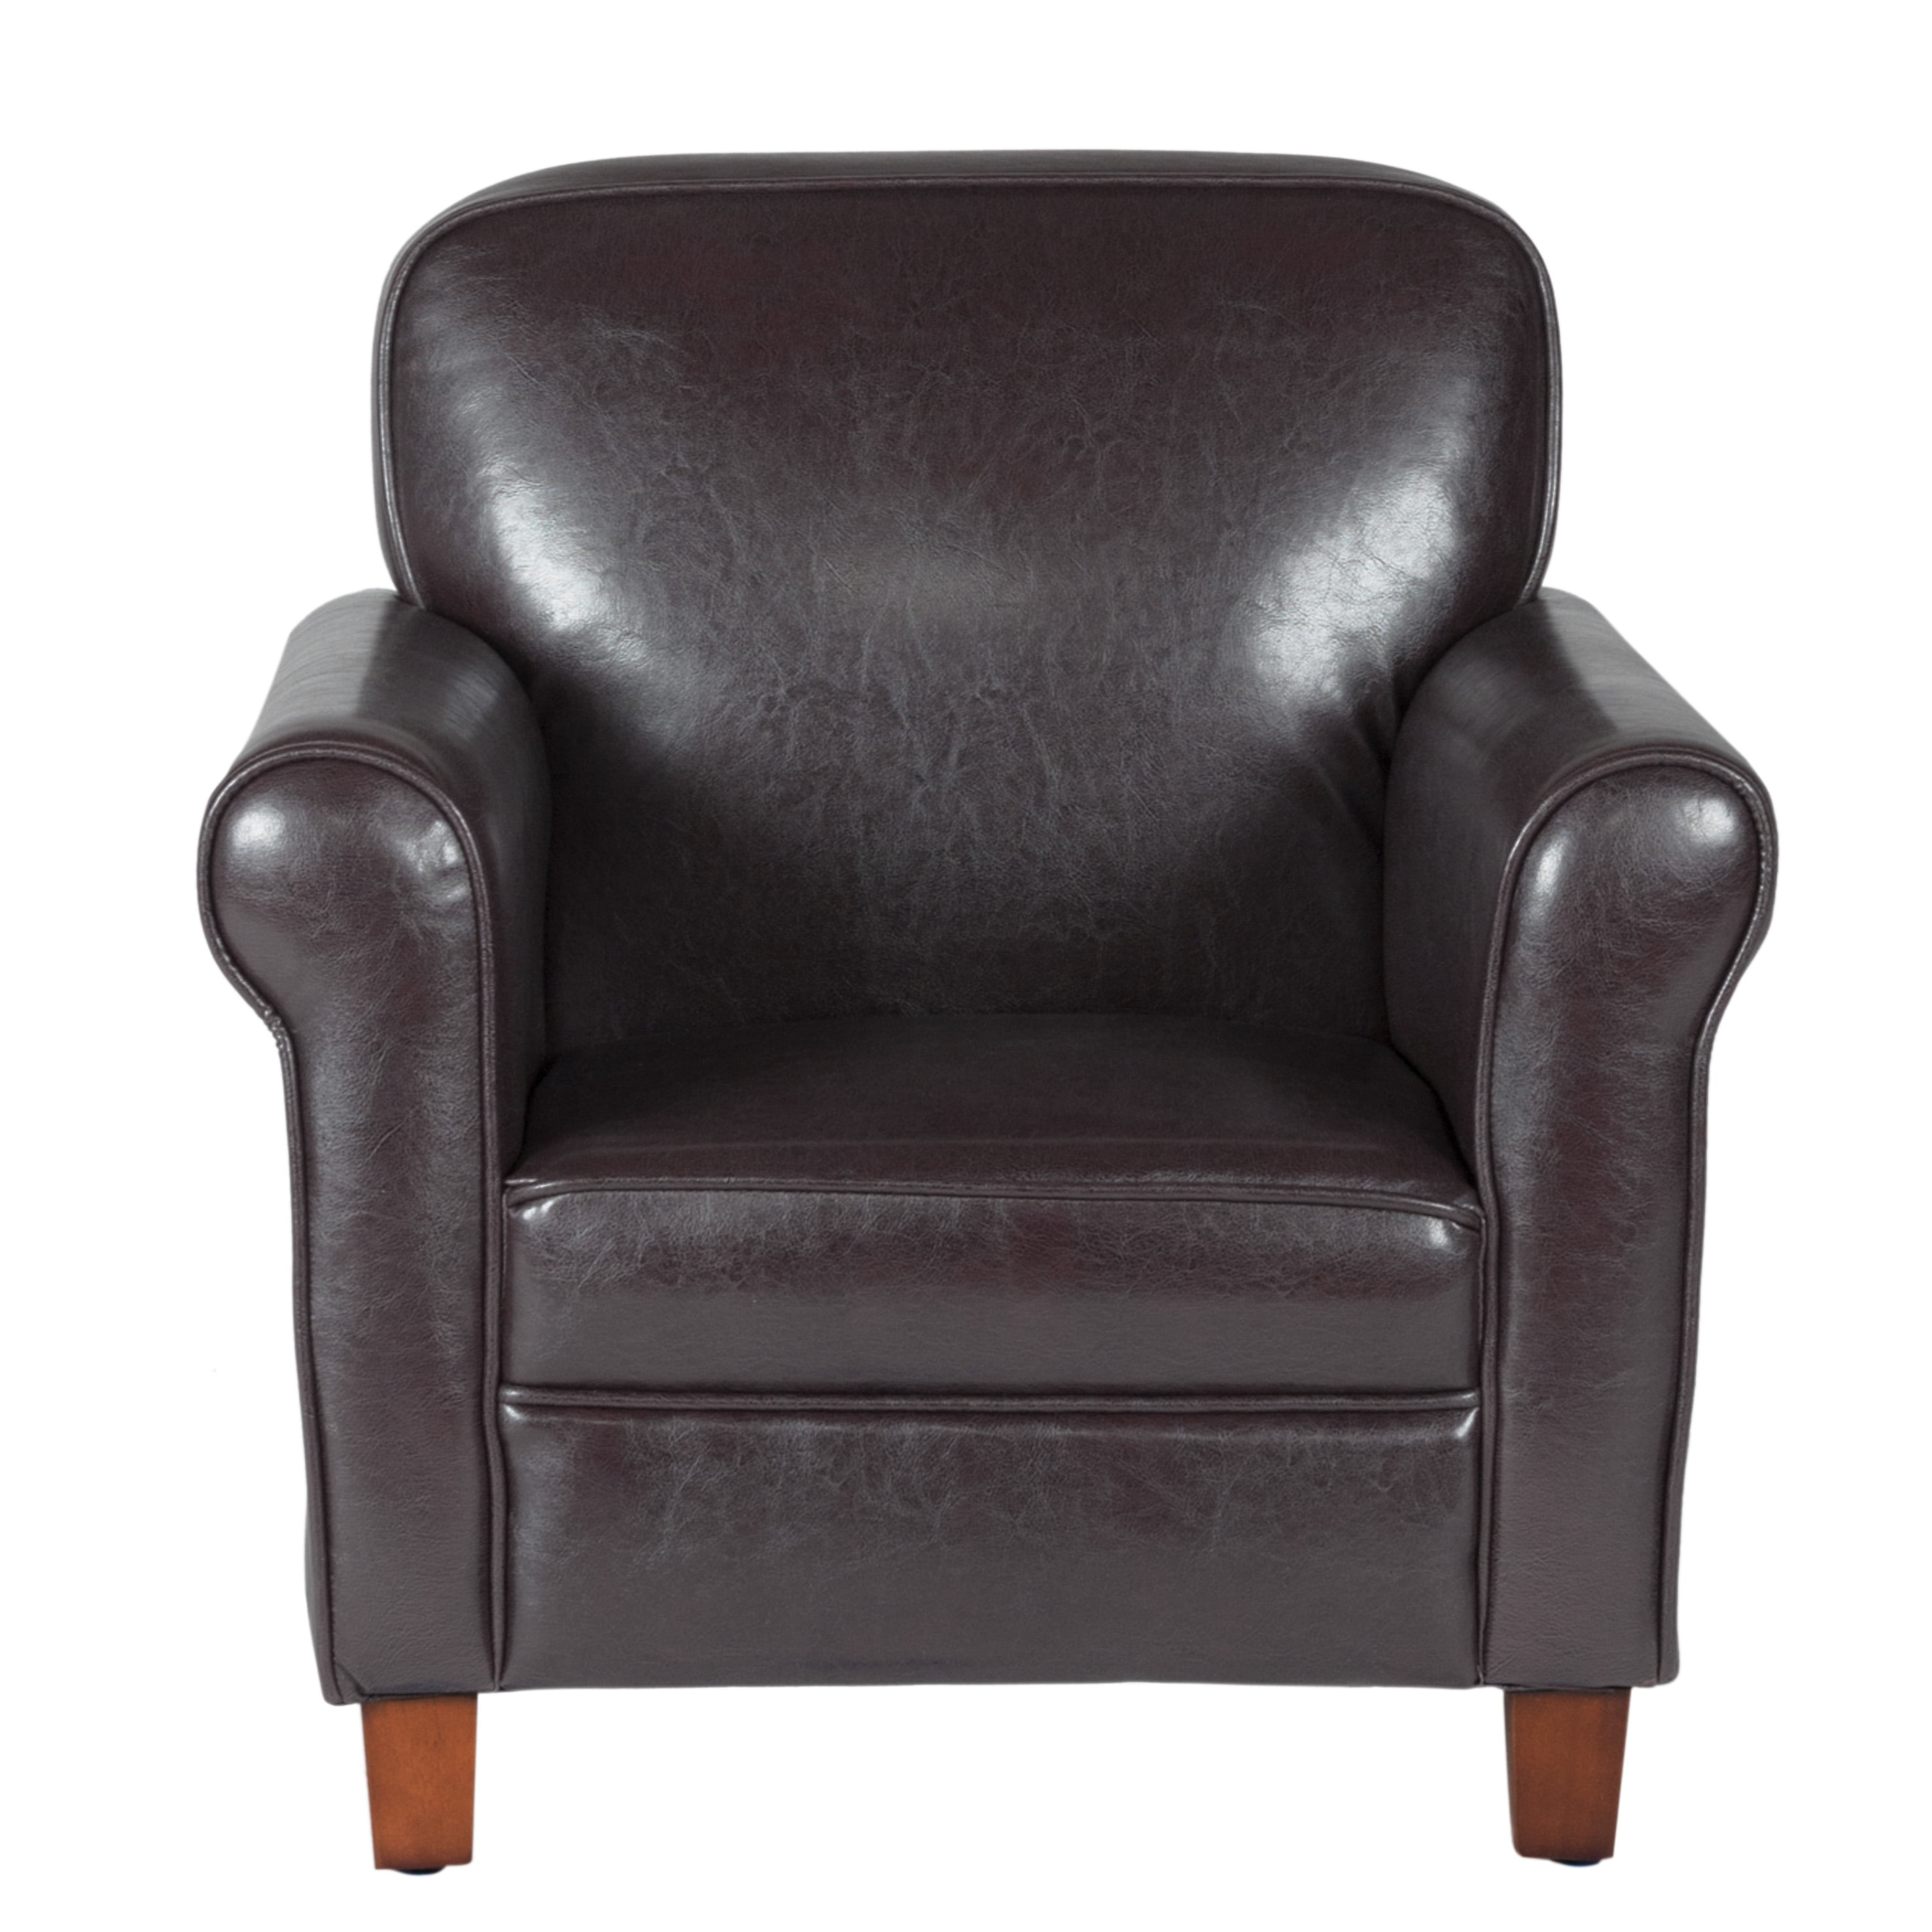 Kids Faux Leather Accent Chair with Rolled Arms, Brown - Walmart.com